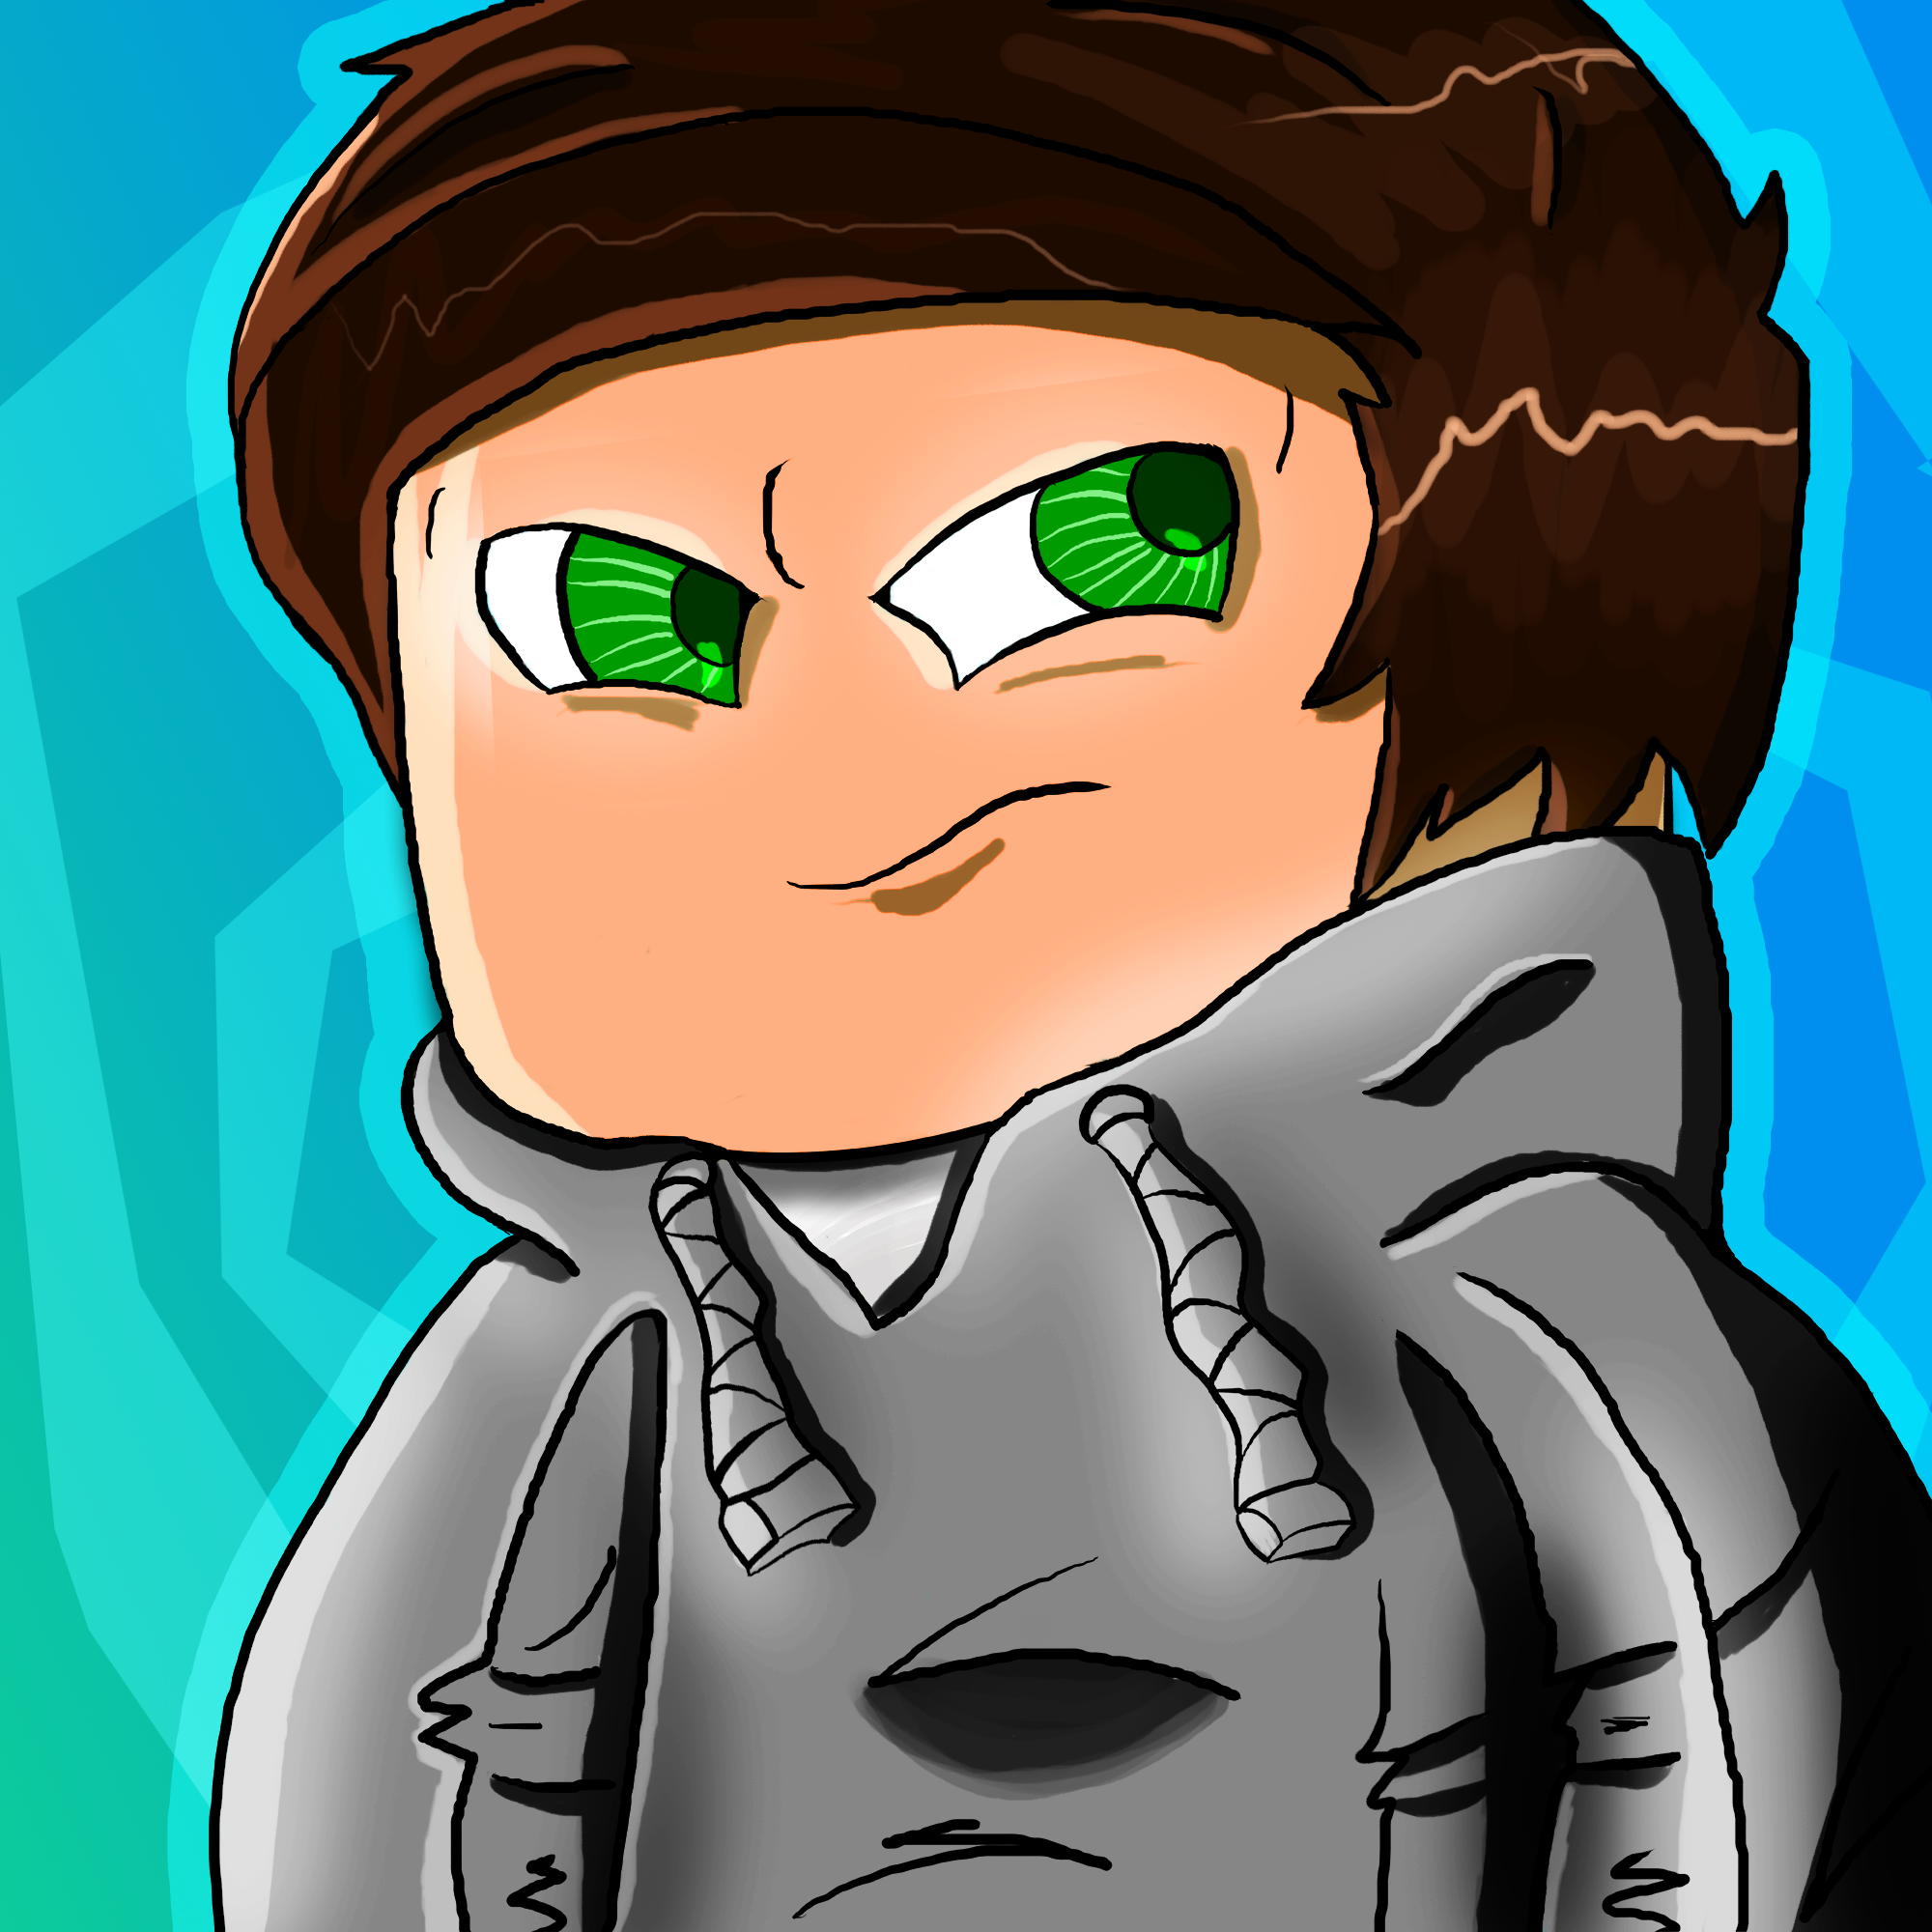 FREE Minecraft Avatar REQUESTS OPEN! - Art Shops - Shops and Requests ...